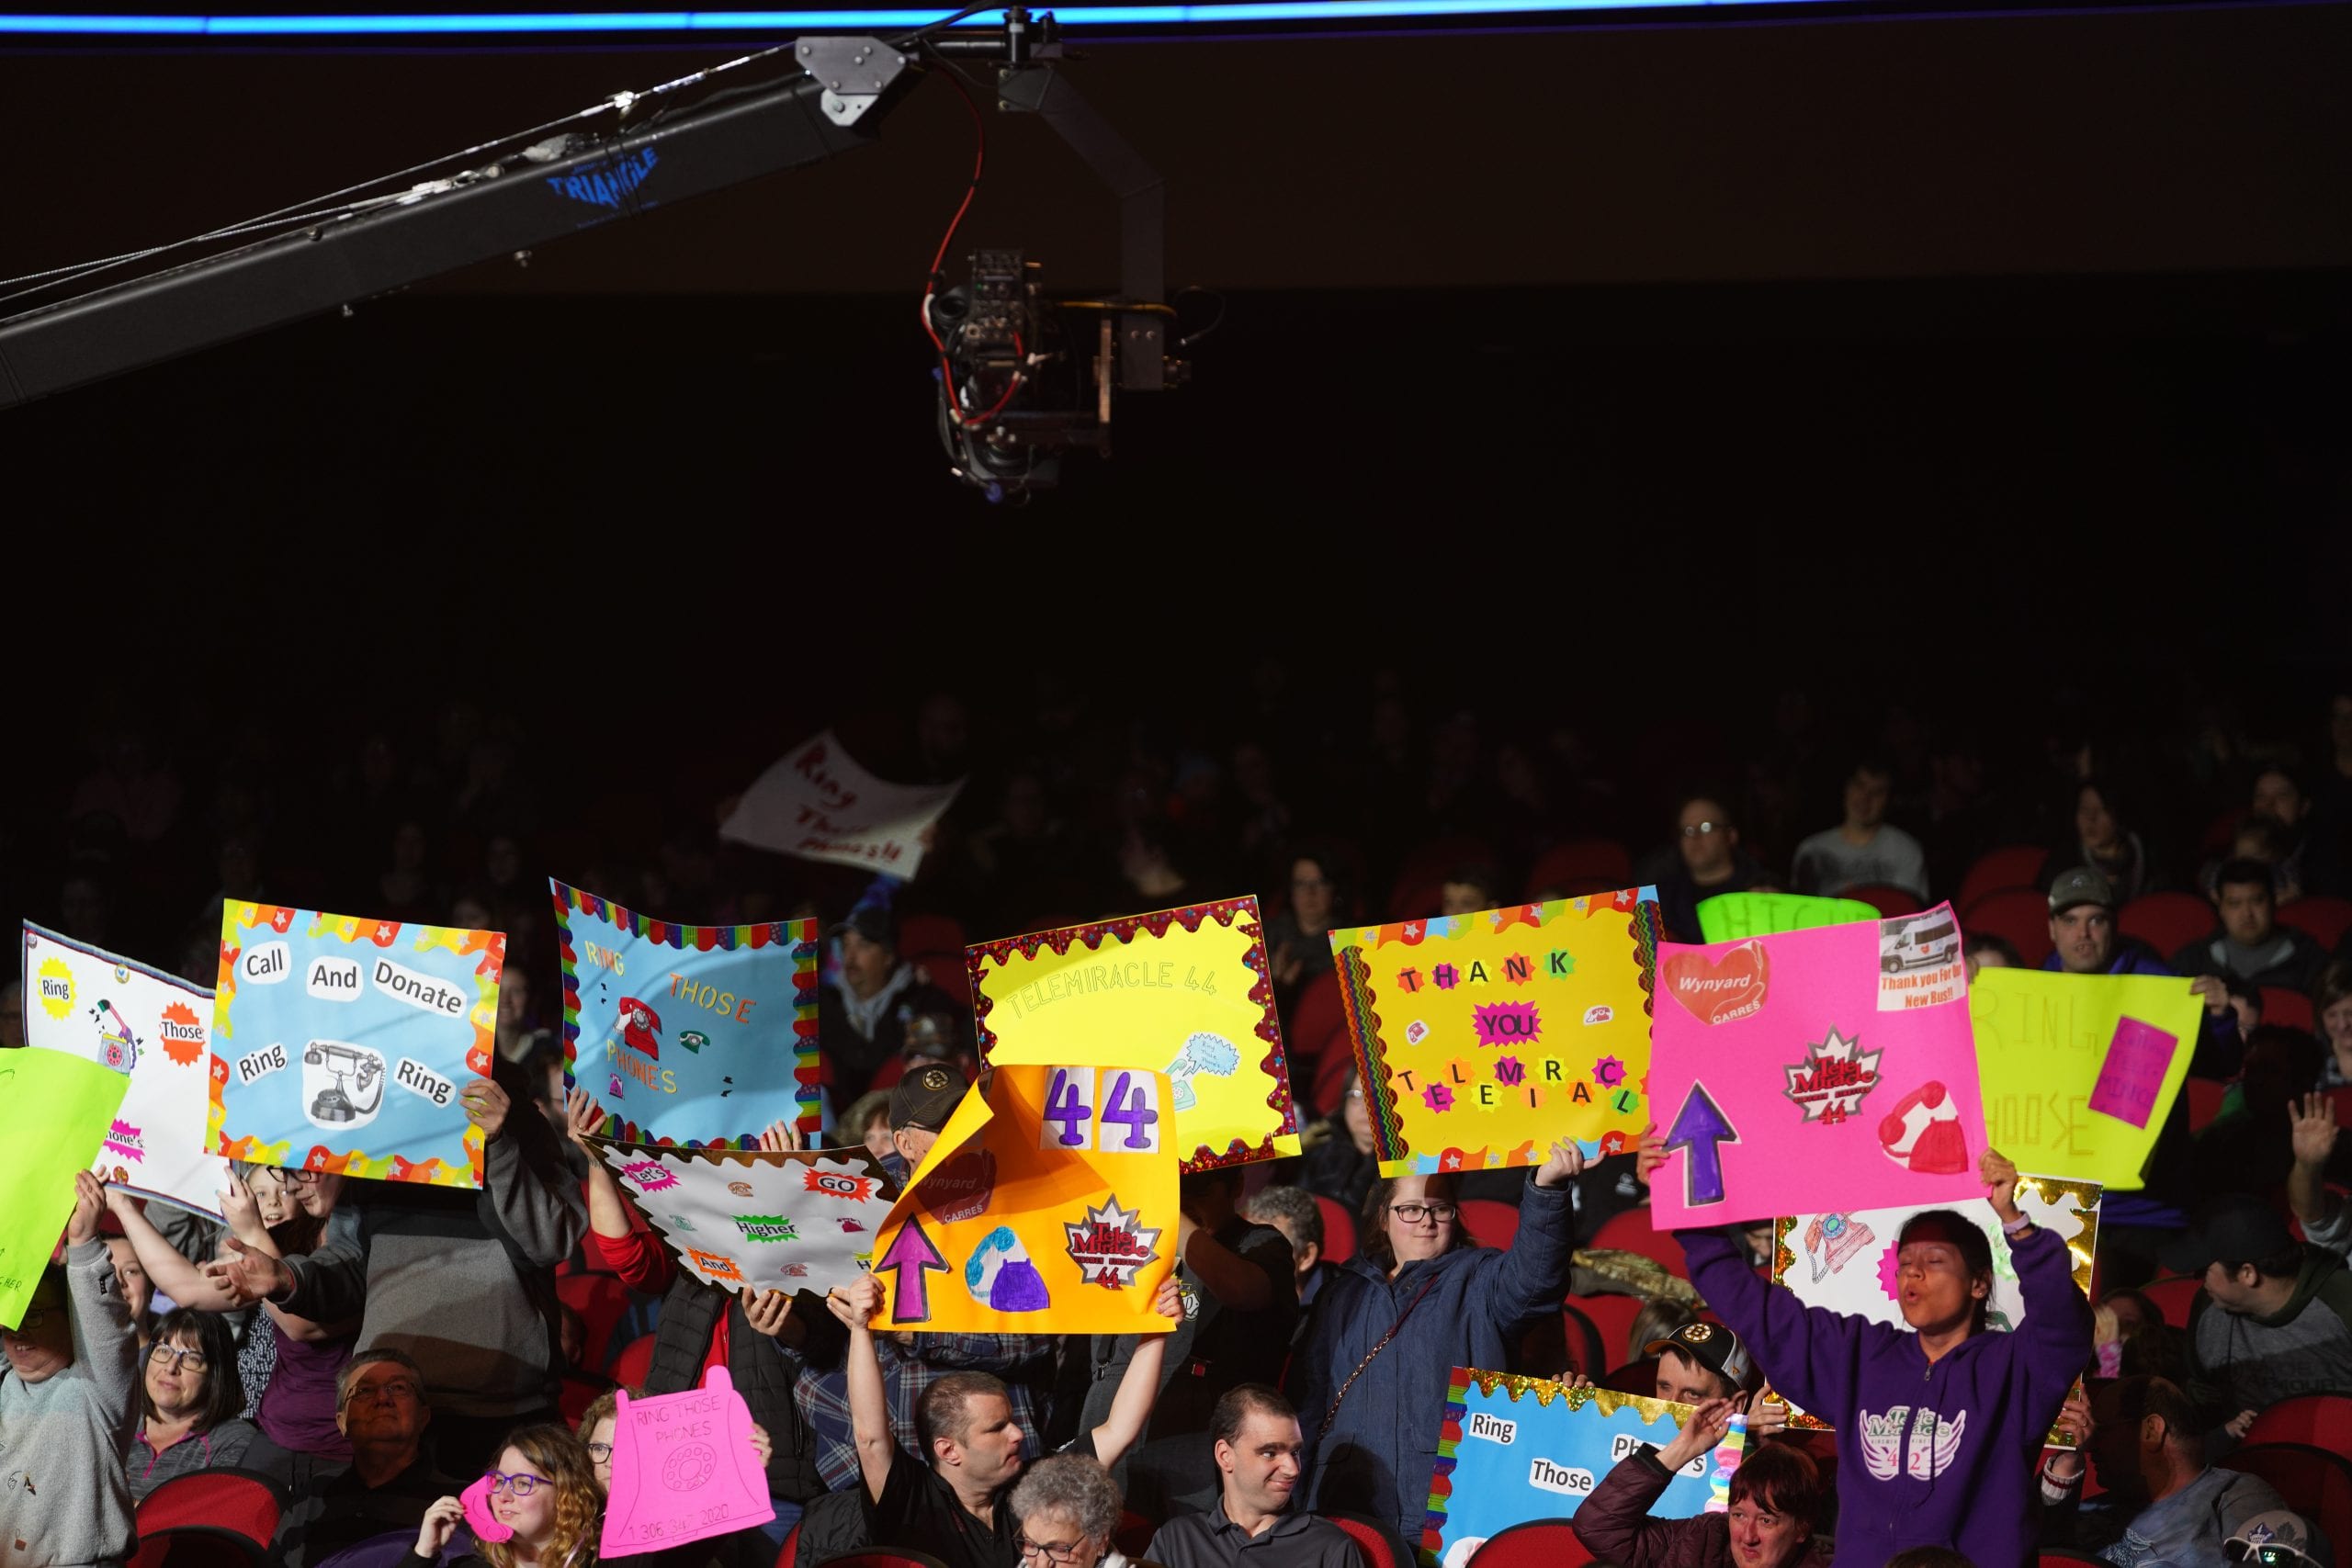 Audience Sign Group